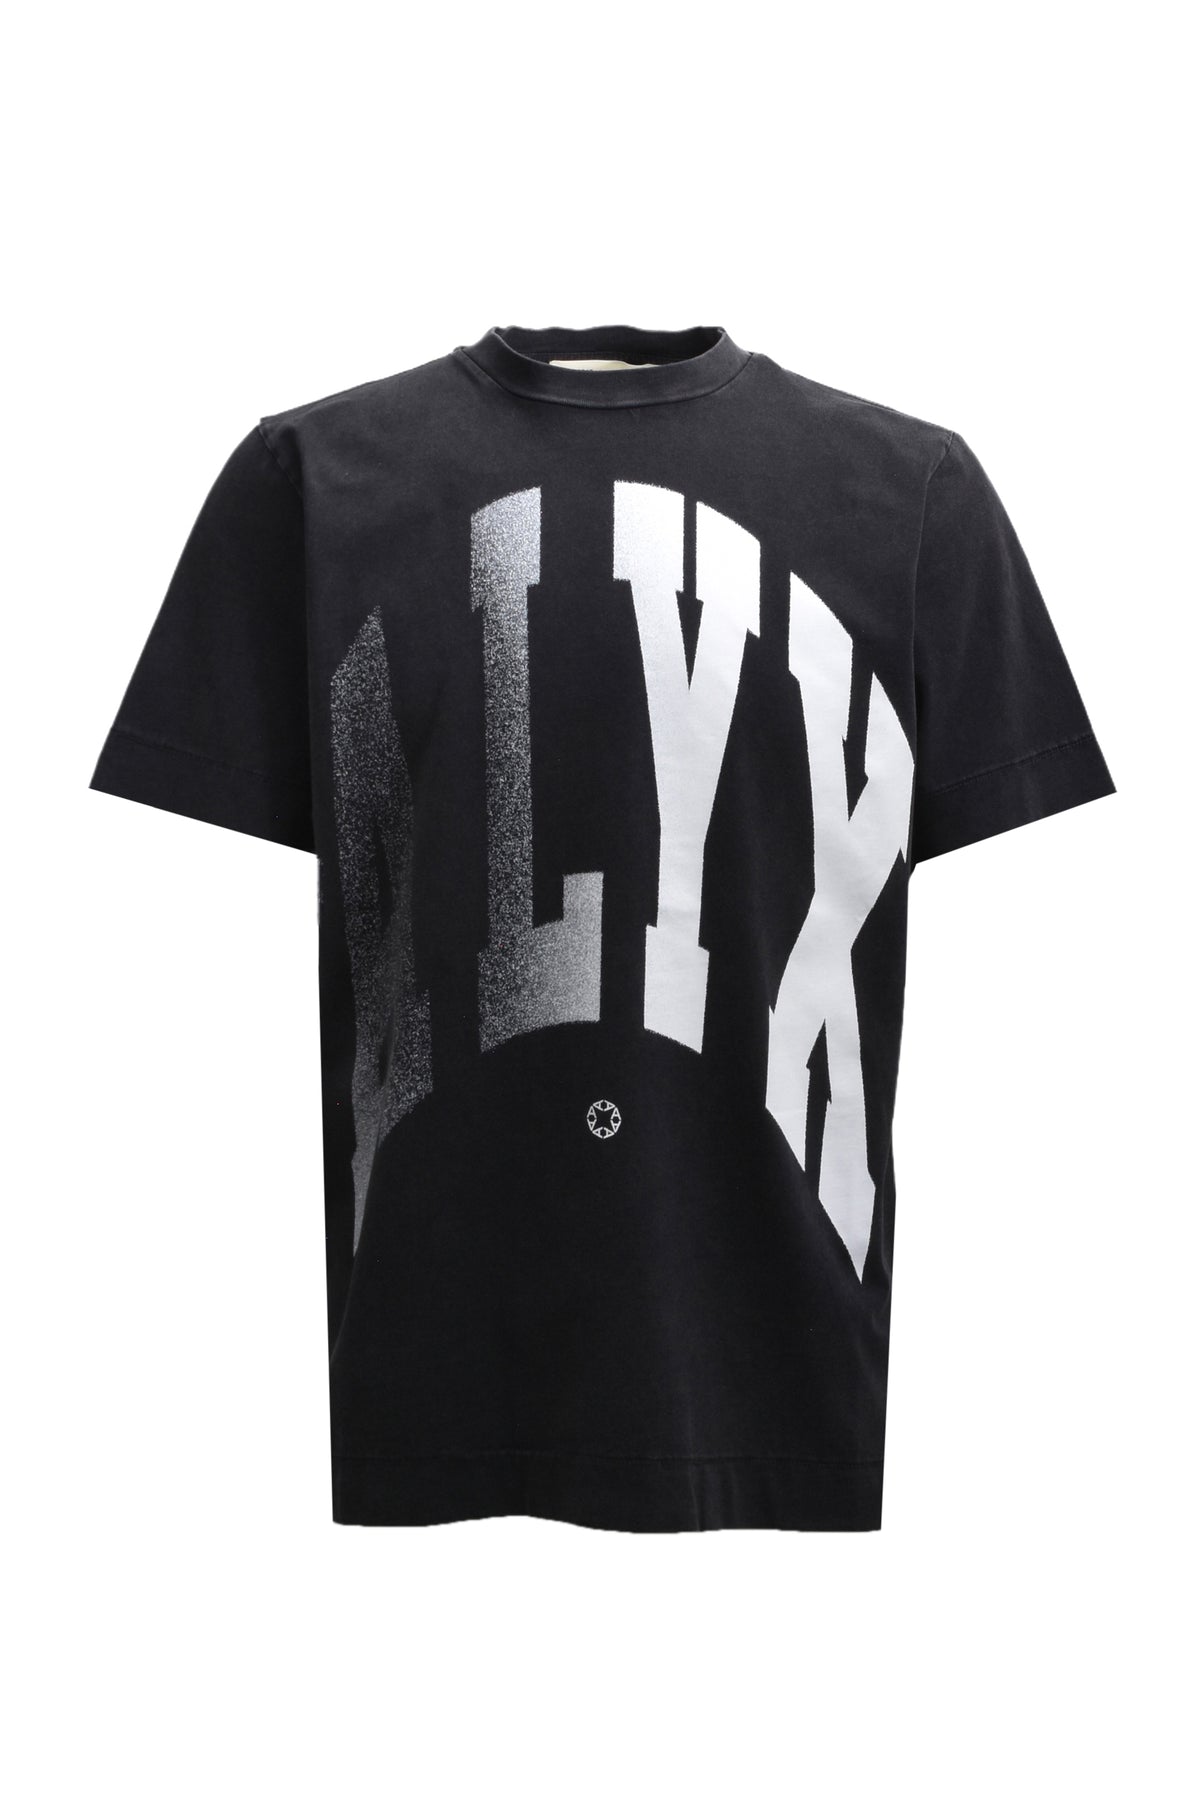 "ALYX" LOGO PRINT GRAPHIC T-SHIRT / WASHED BLK